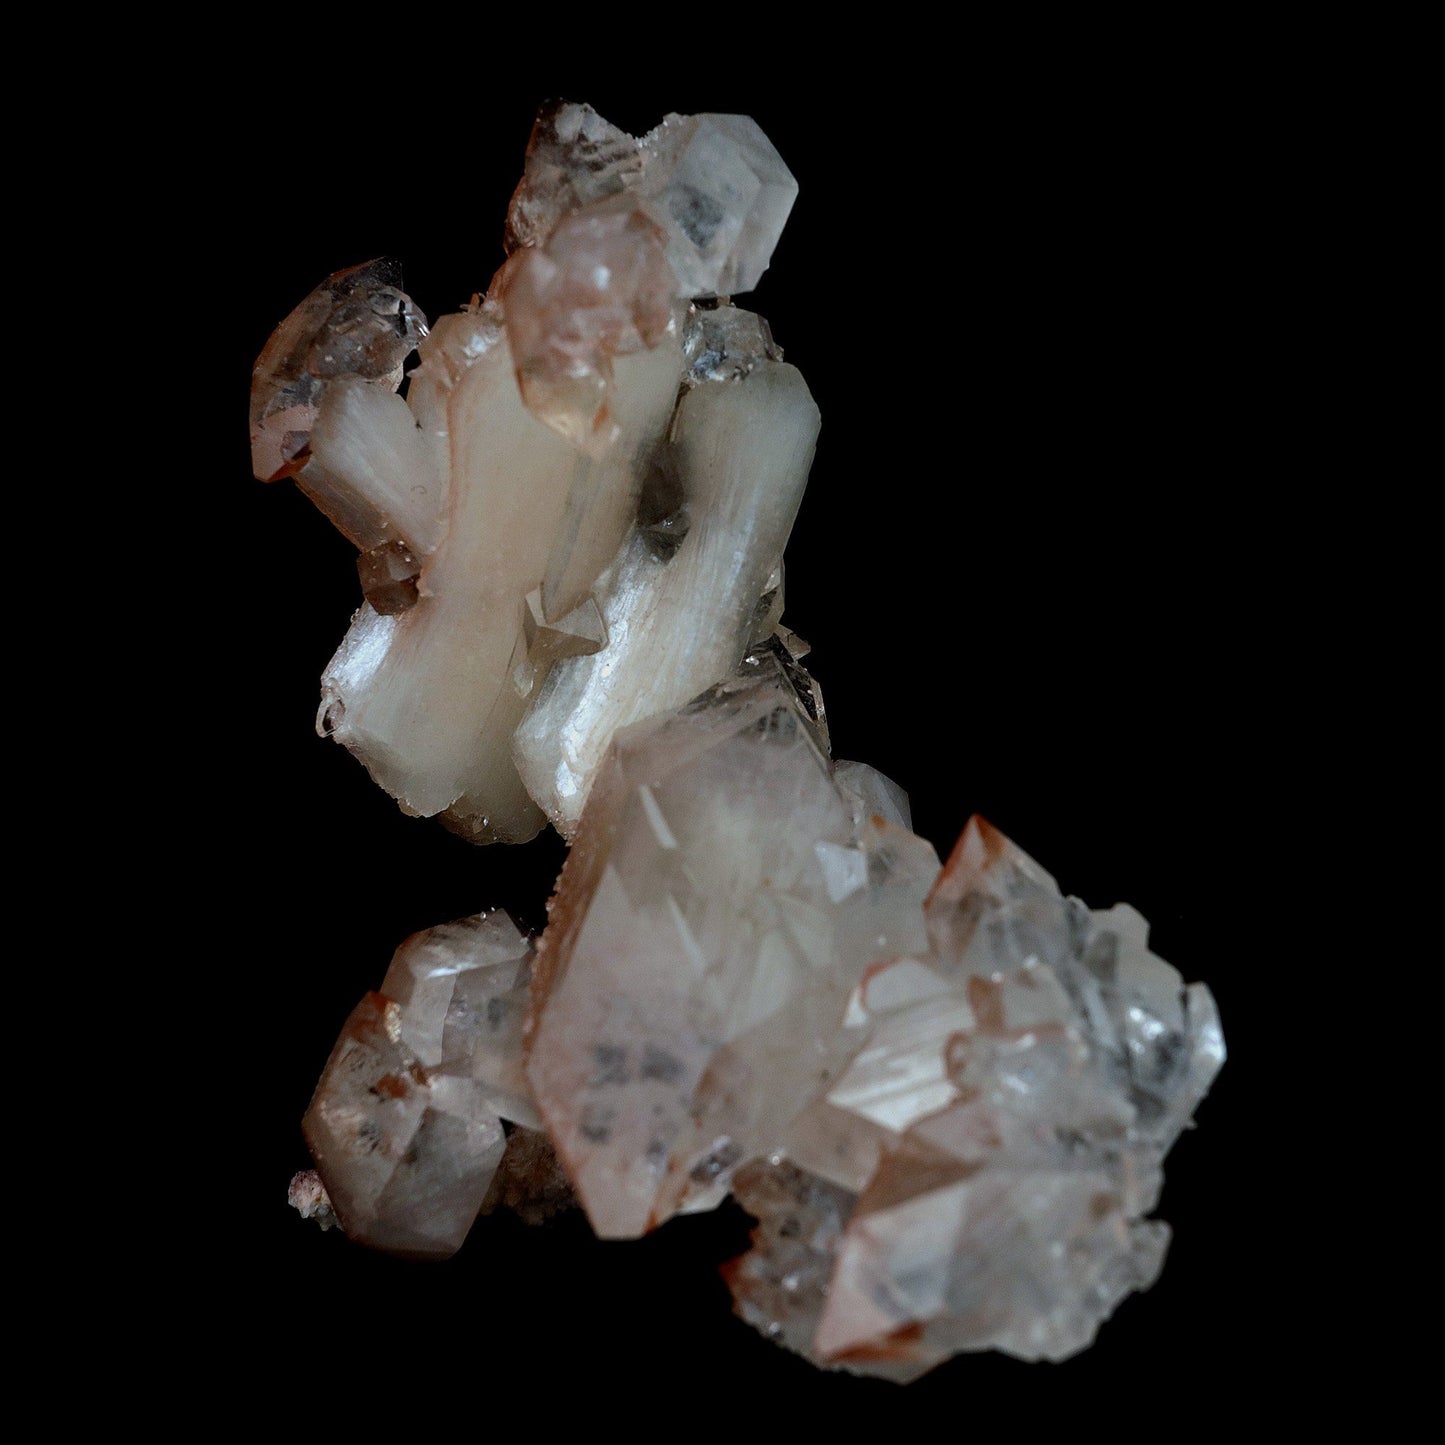 Pointed Apophyllite with Stilbite On Chalcedony Natural Mineral # B 41…  https://www.superbminerals.us/products/pointed-apophyllite-with-stilbite-on-chalcedony-natural-mineral-b-4176  Features:This specimen is mainly composed of the white/clear Apophyllite with inclusions of red hematite which transform partially red crystal and accented with the beautiful peachy colored stilbite that grew along with it. That being said, it was pieced back together seamlessly and is an extraordinary specimen